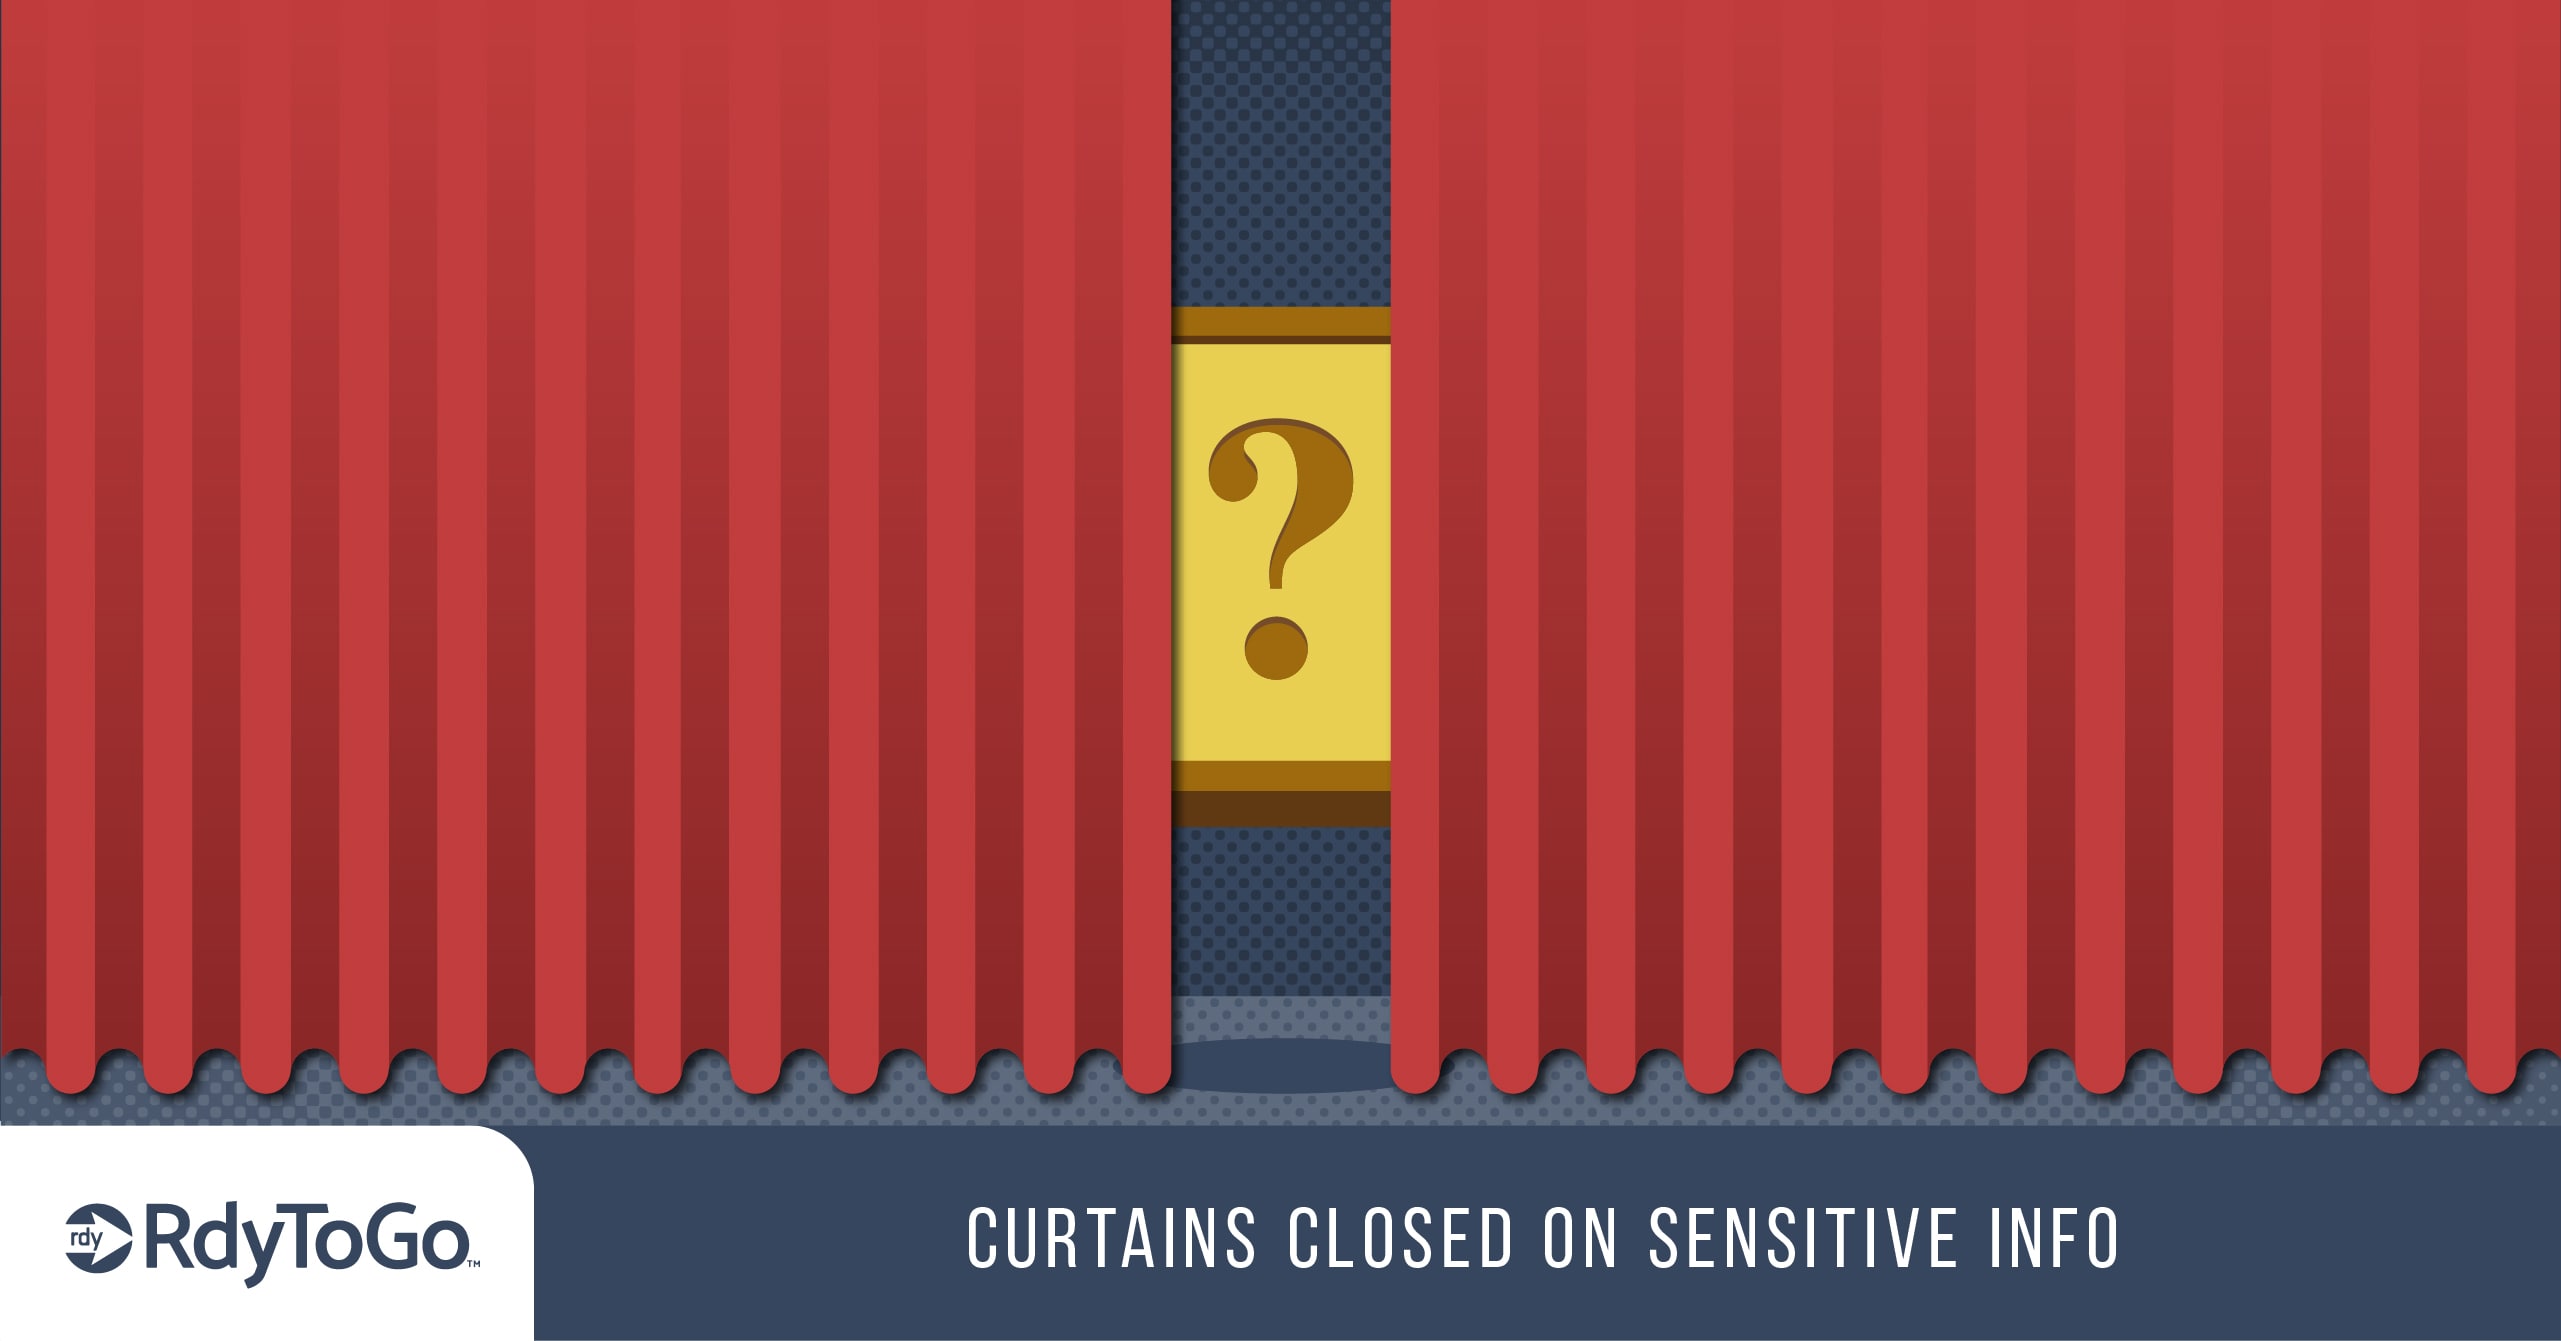 Curtains closed - RdyToGo privacy for sensitive info